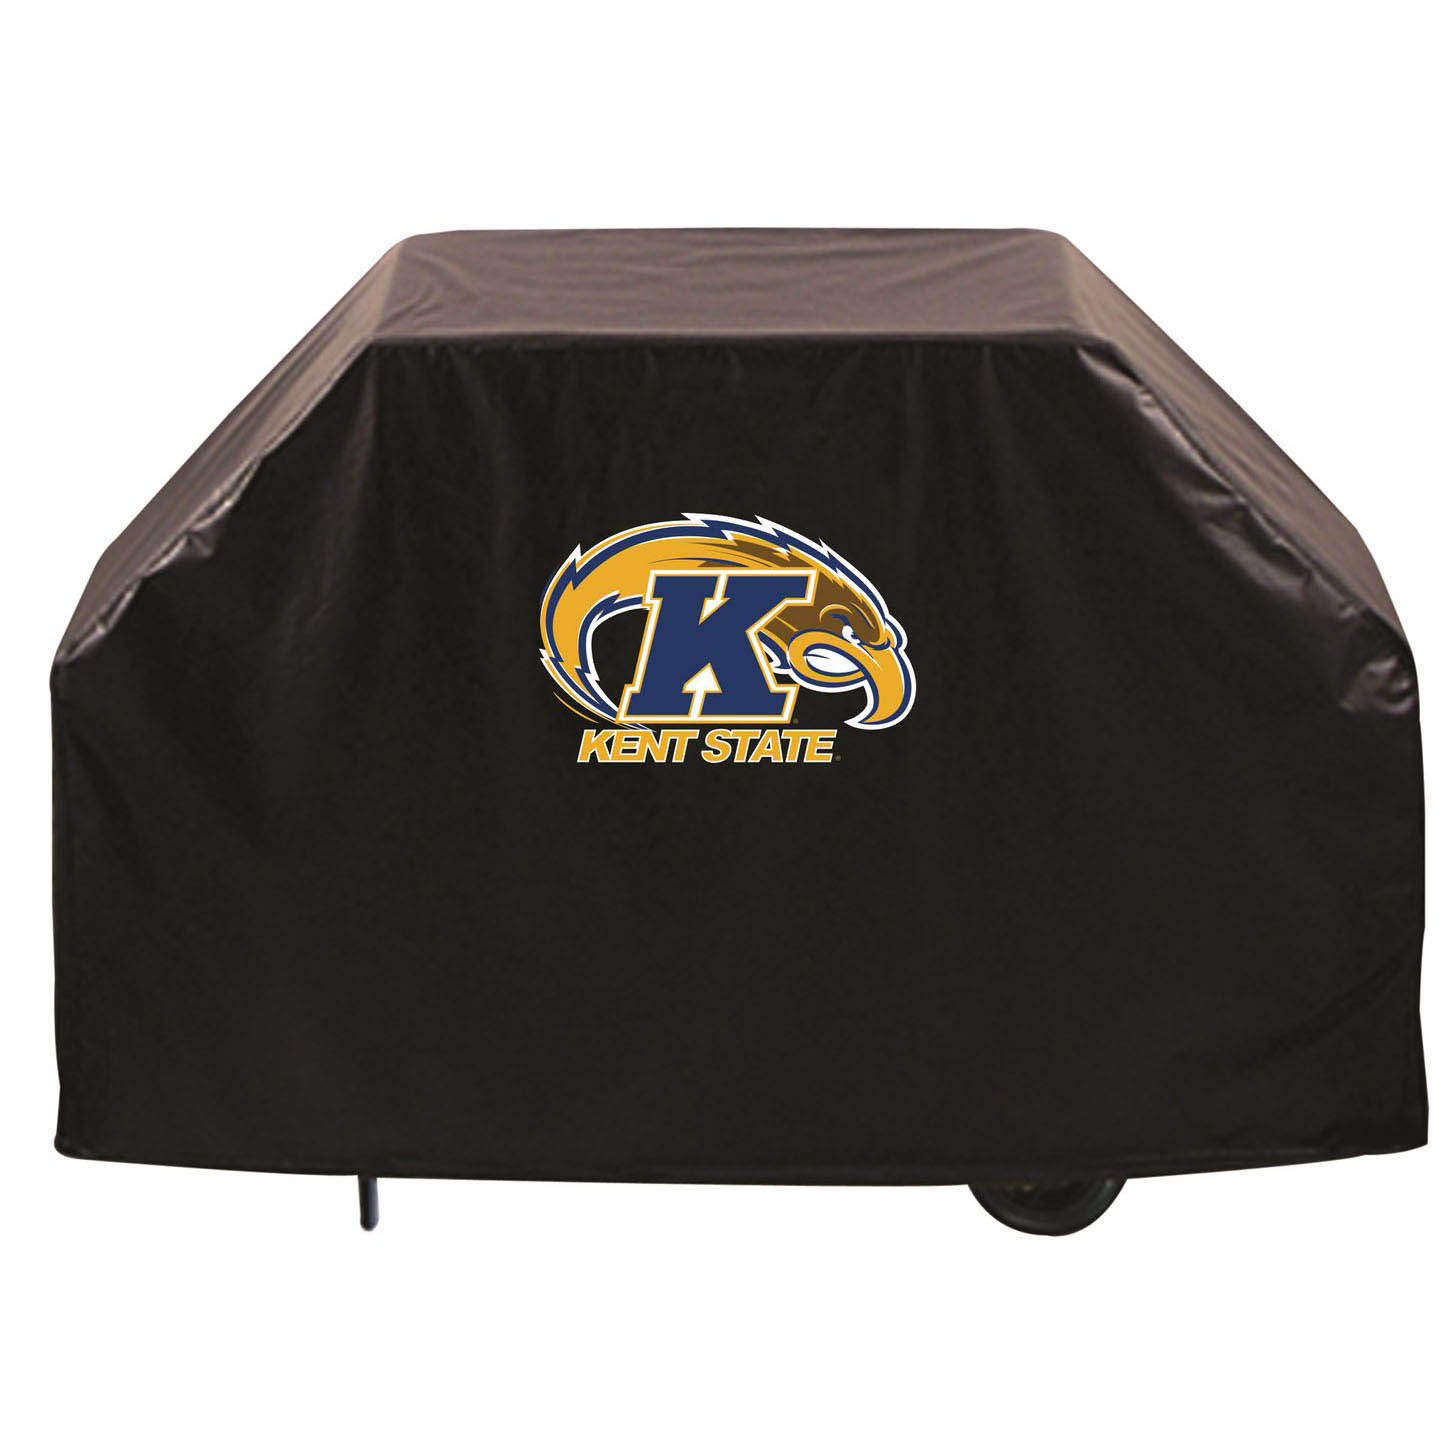 Kent State Grill Cover